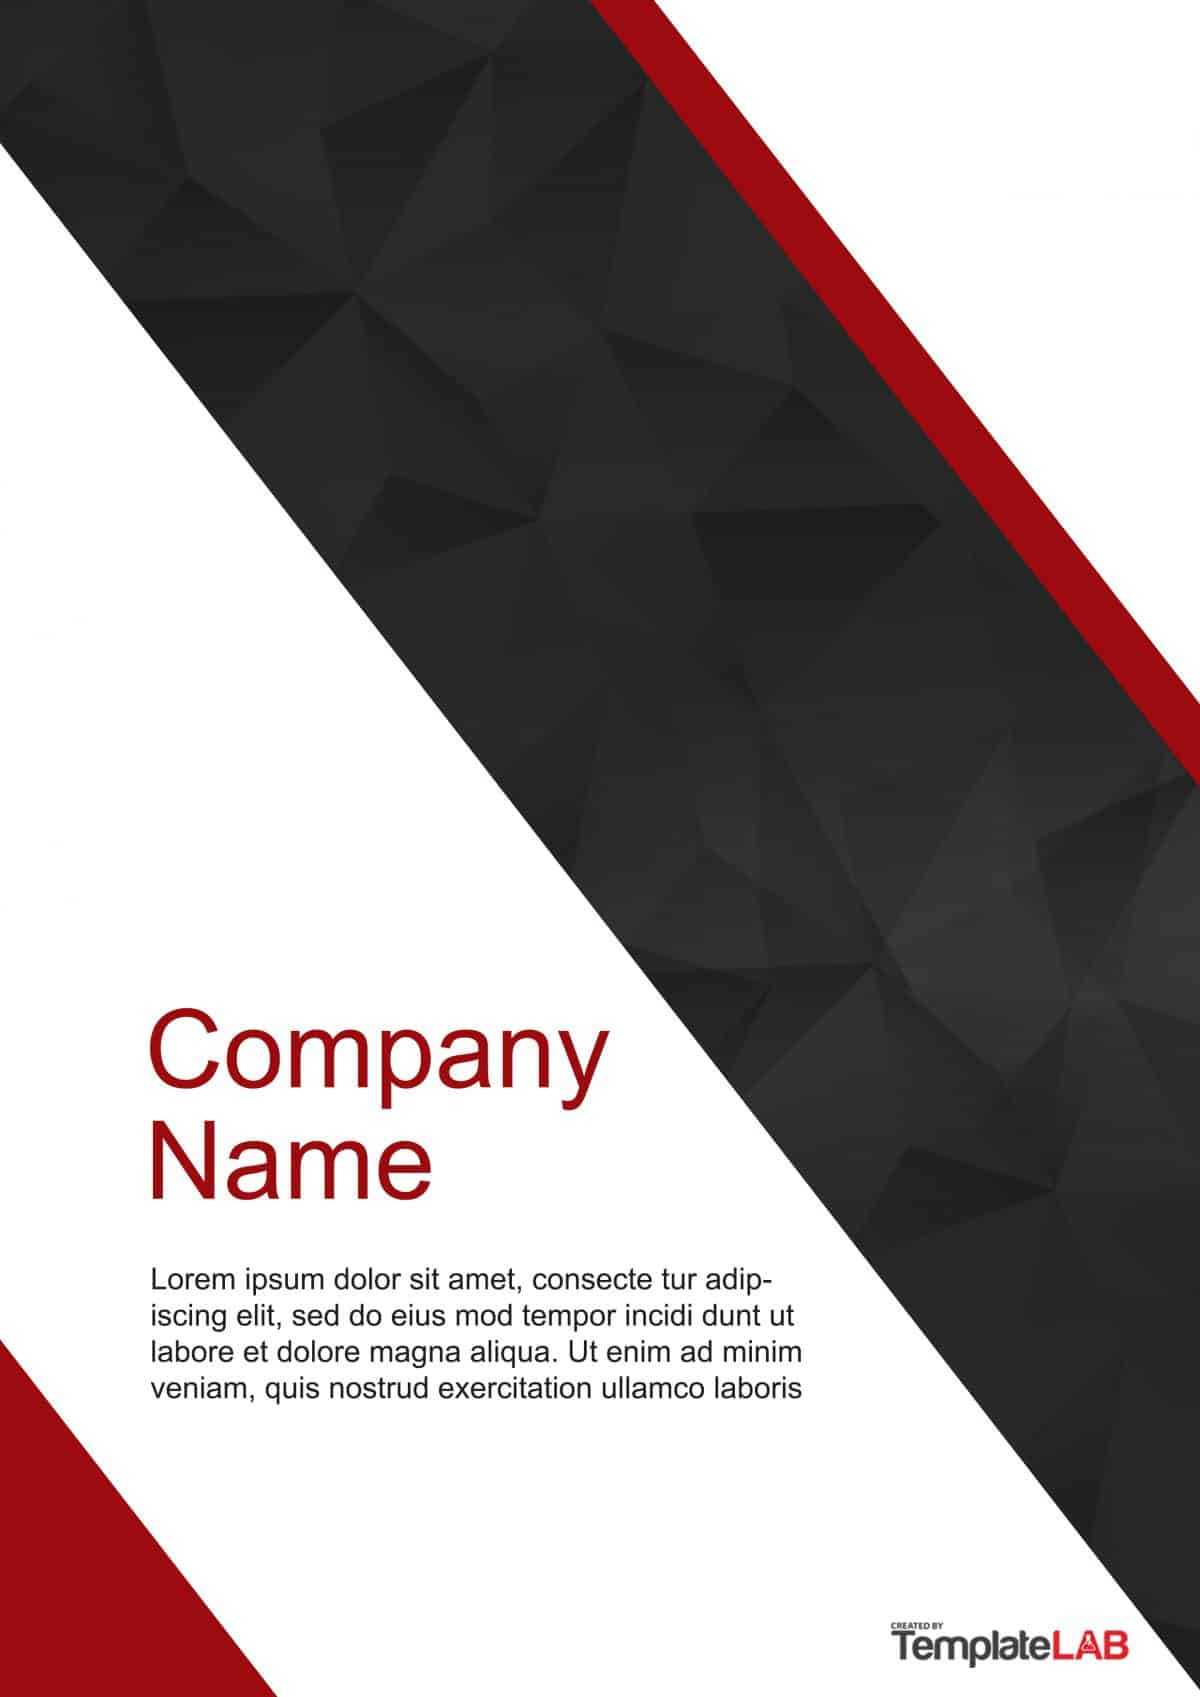 39 Amazing Cover Page Templates (Word + Psd) ᐅ Templatelab Regarding Cover Pages For Word Templates